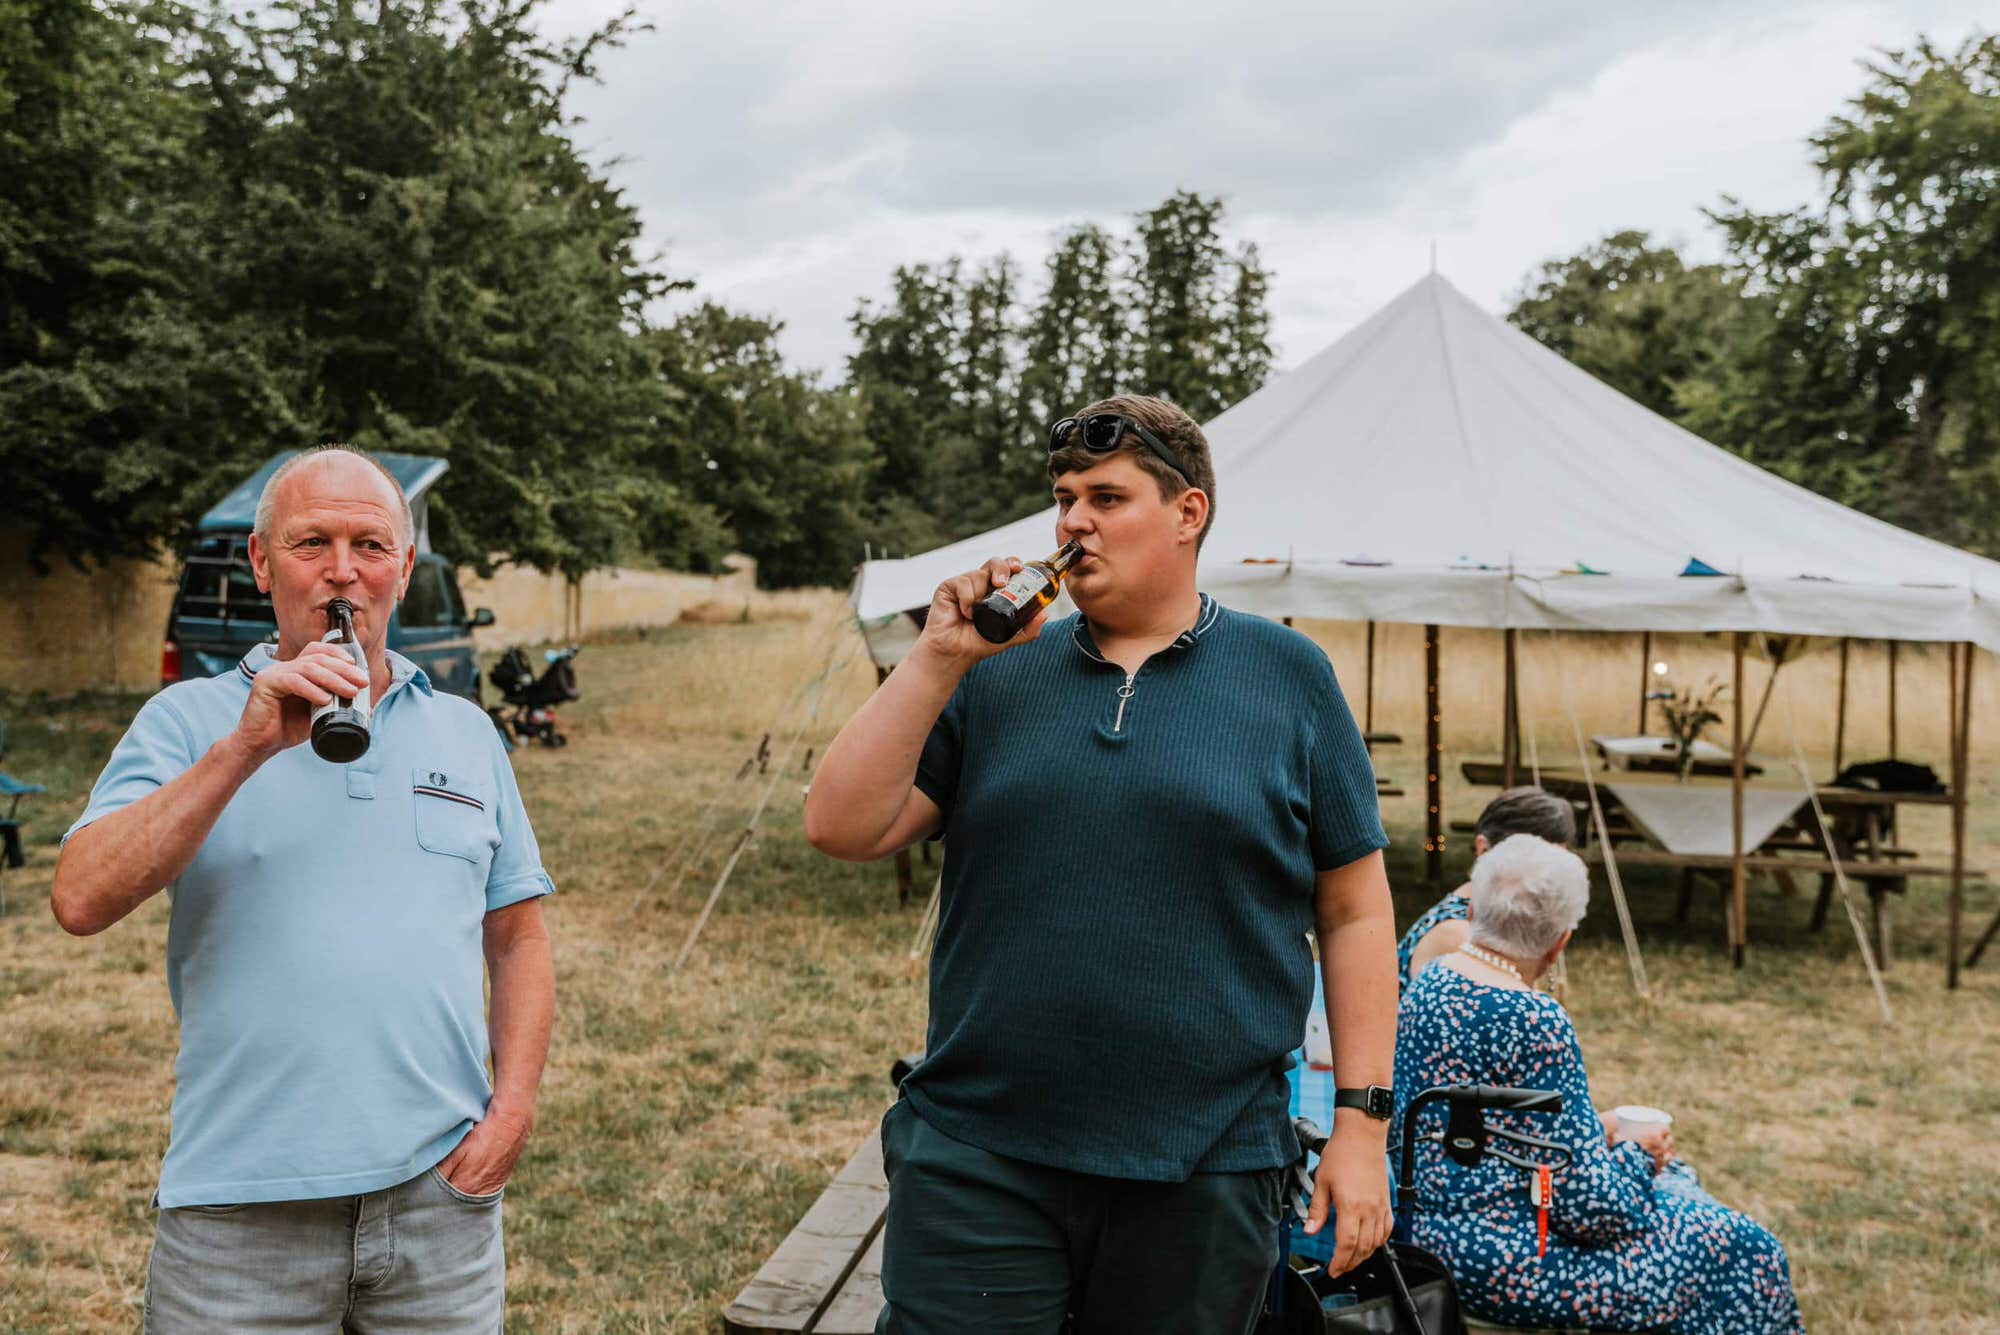 guests at the wedding drinking beer from the bottle